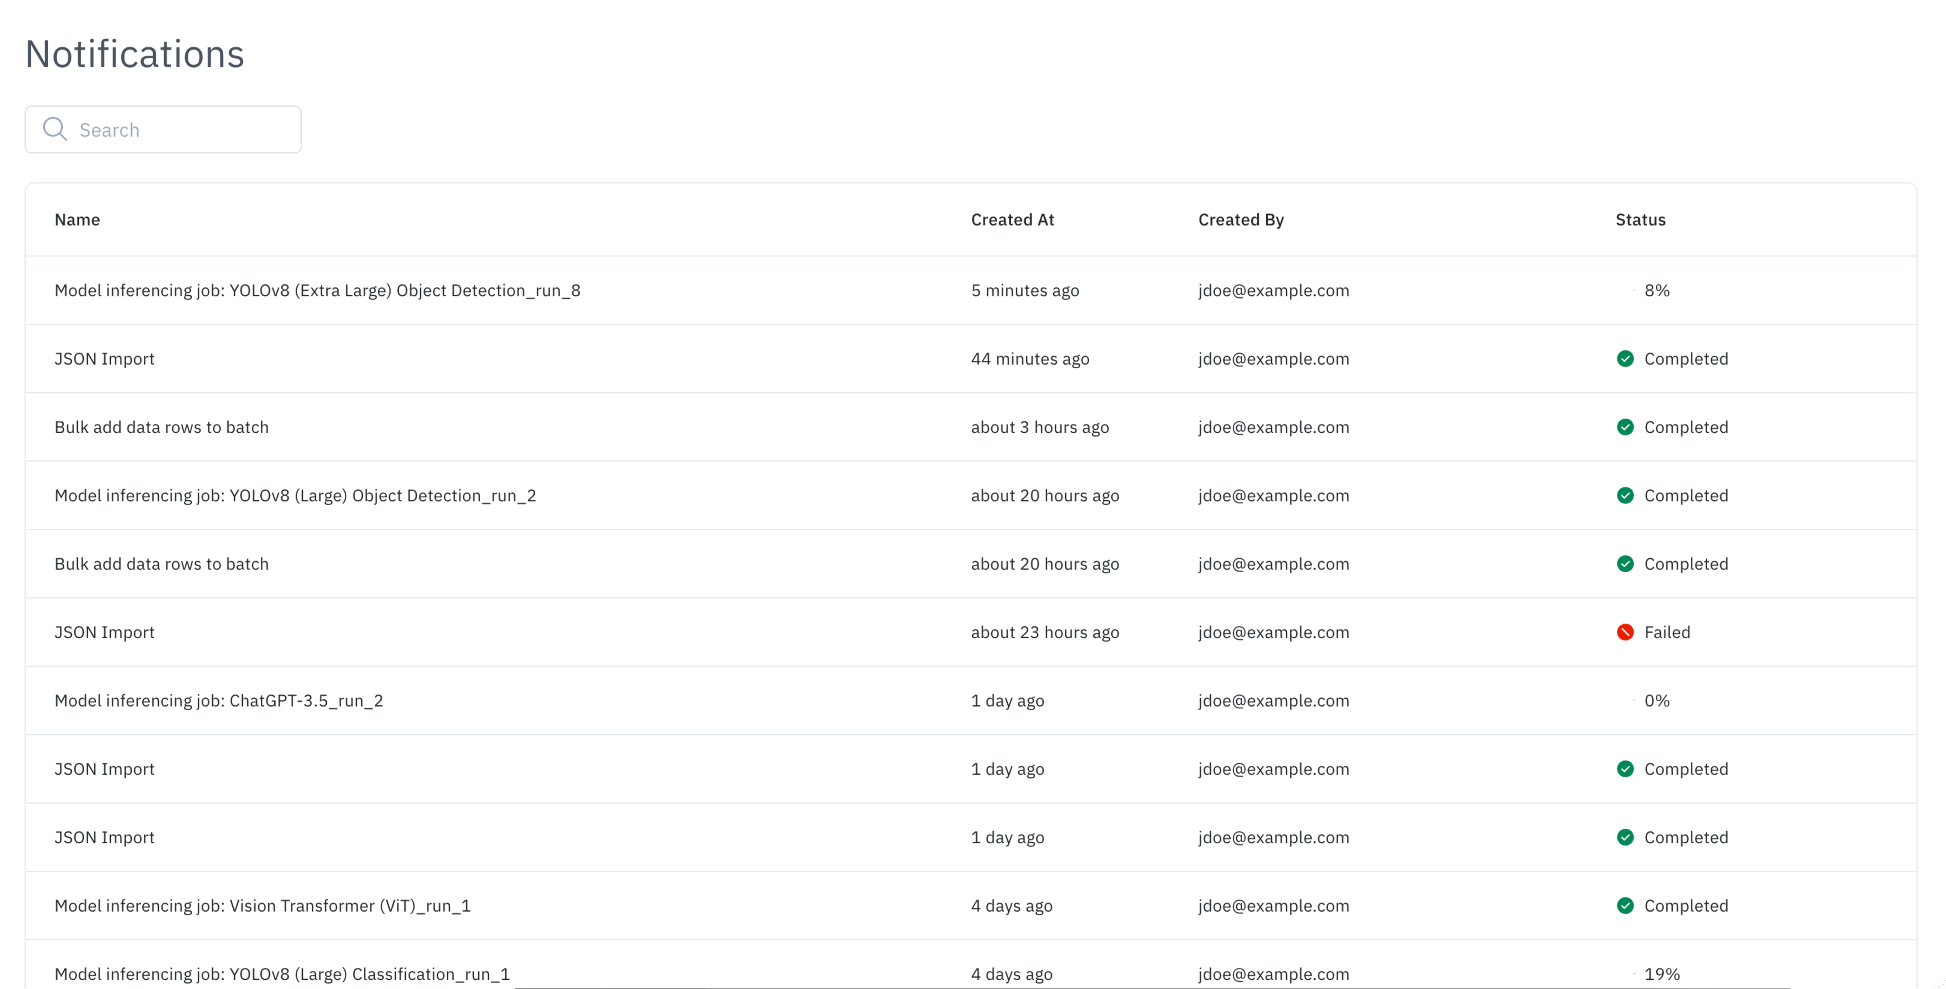 The notifications tab shows current progress of all active and recent jobs.